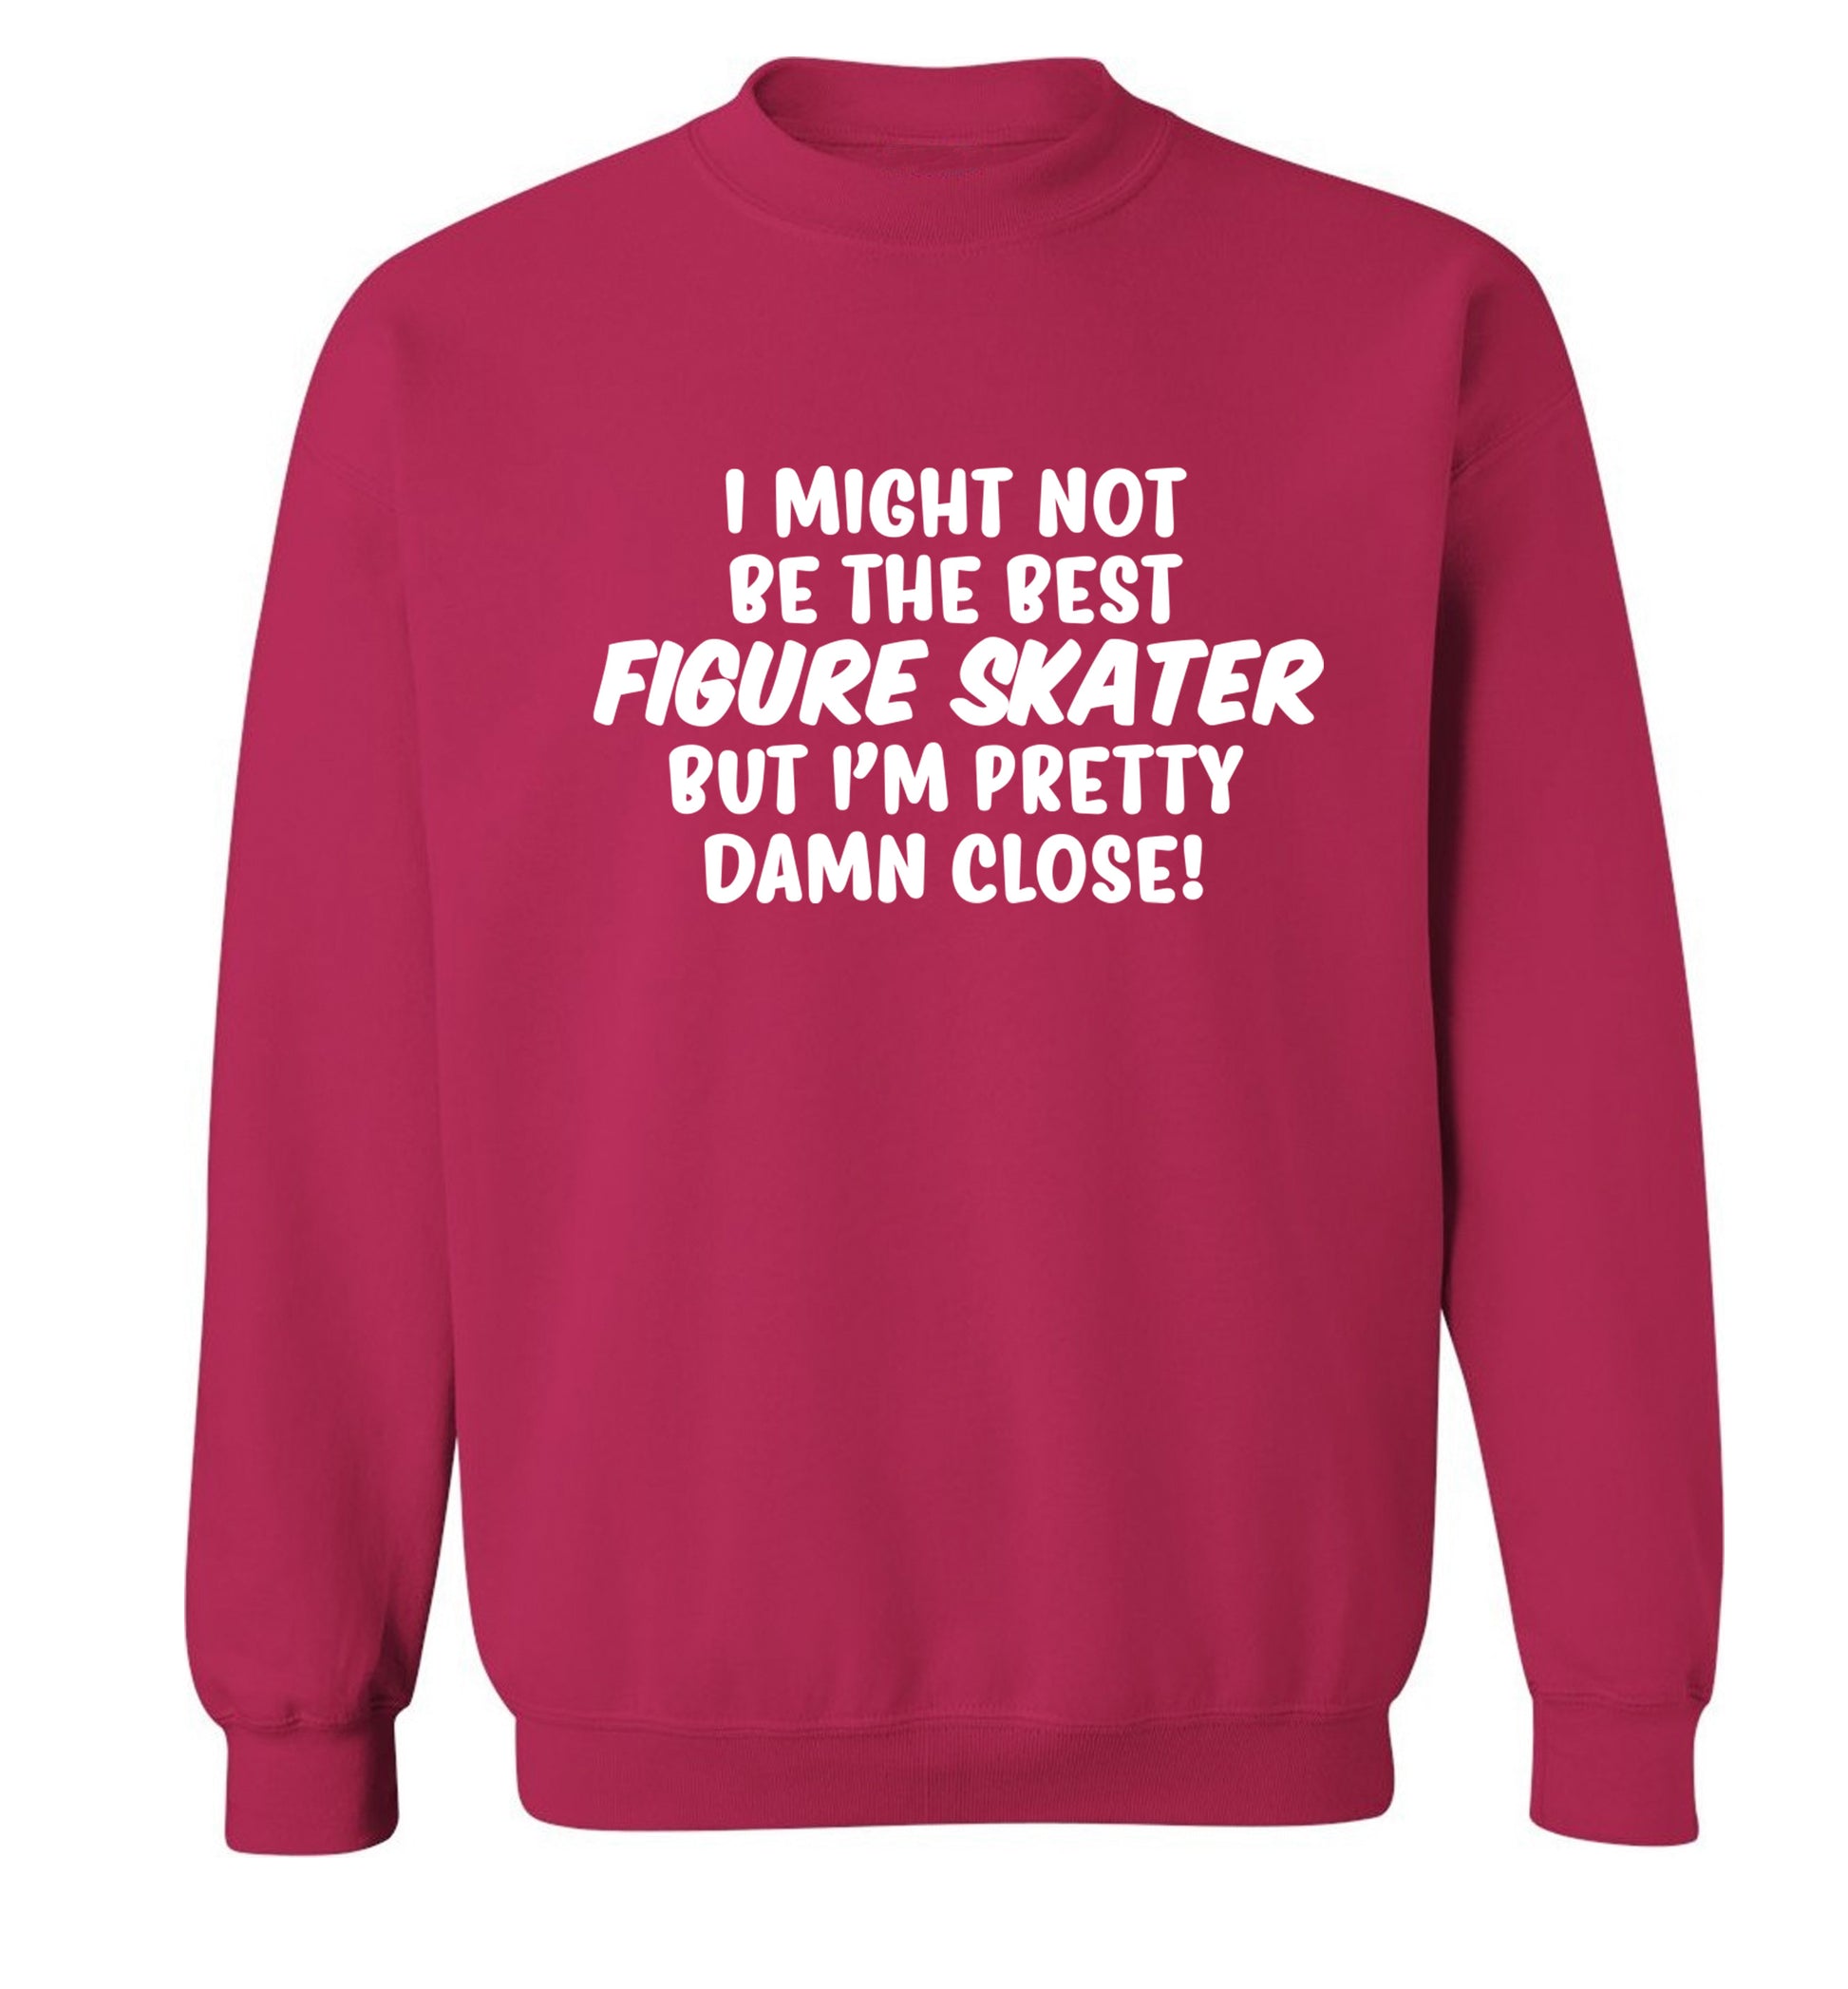 I might not be the best figure skater but I'm pretty damn close! Adult's unisexpink Sweater 2XL